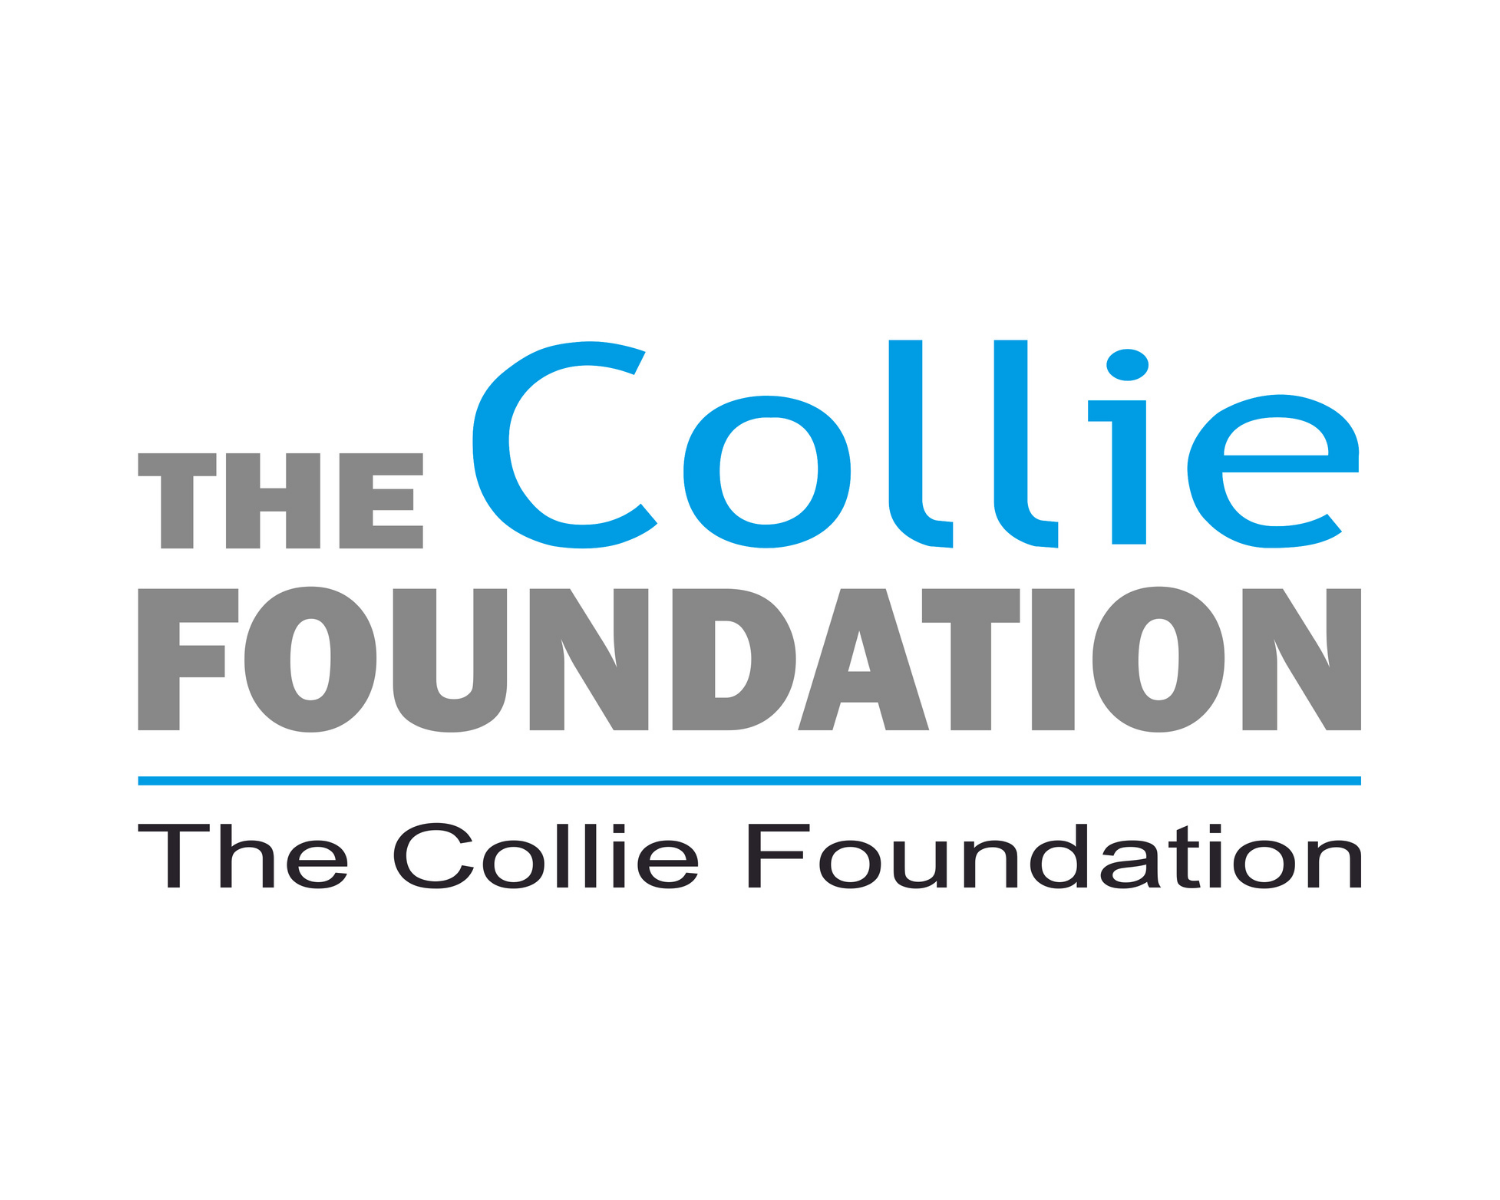 The Collie Foundation